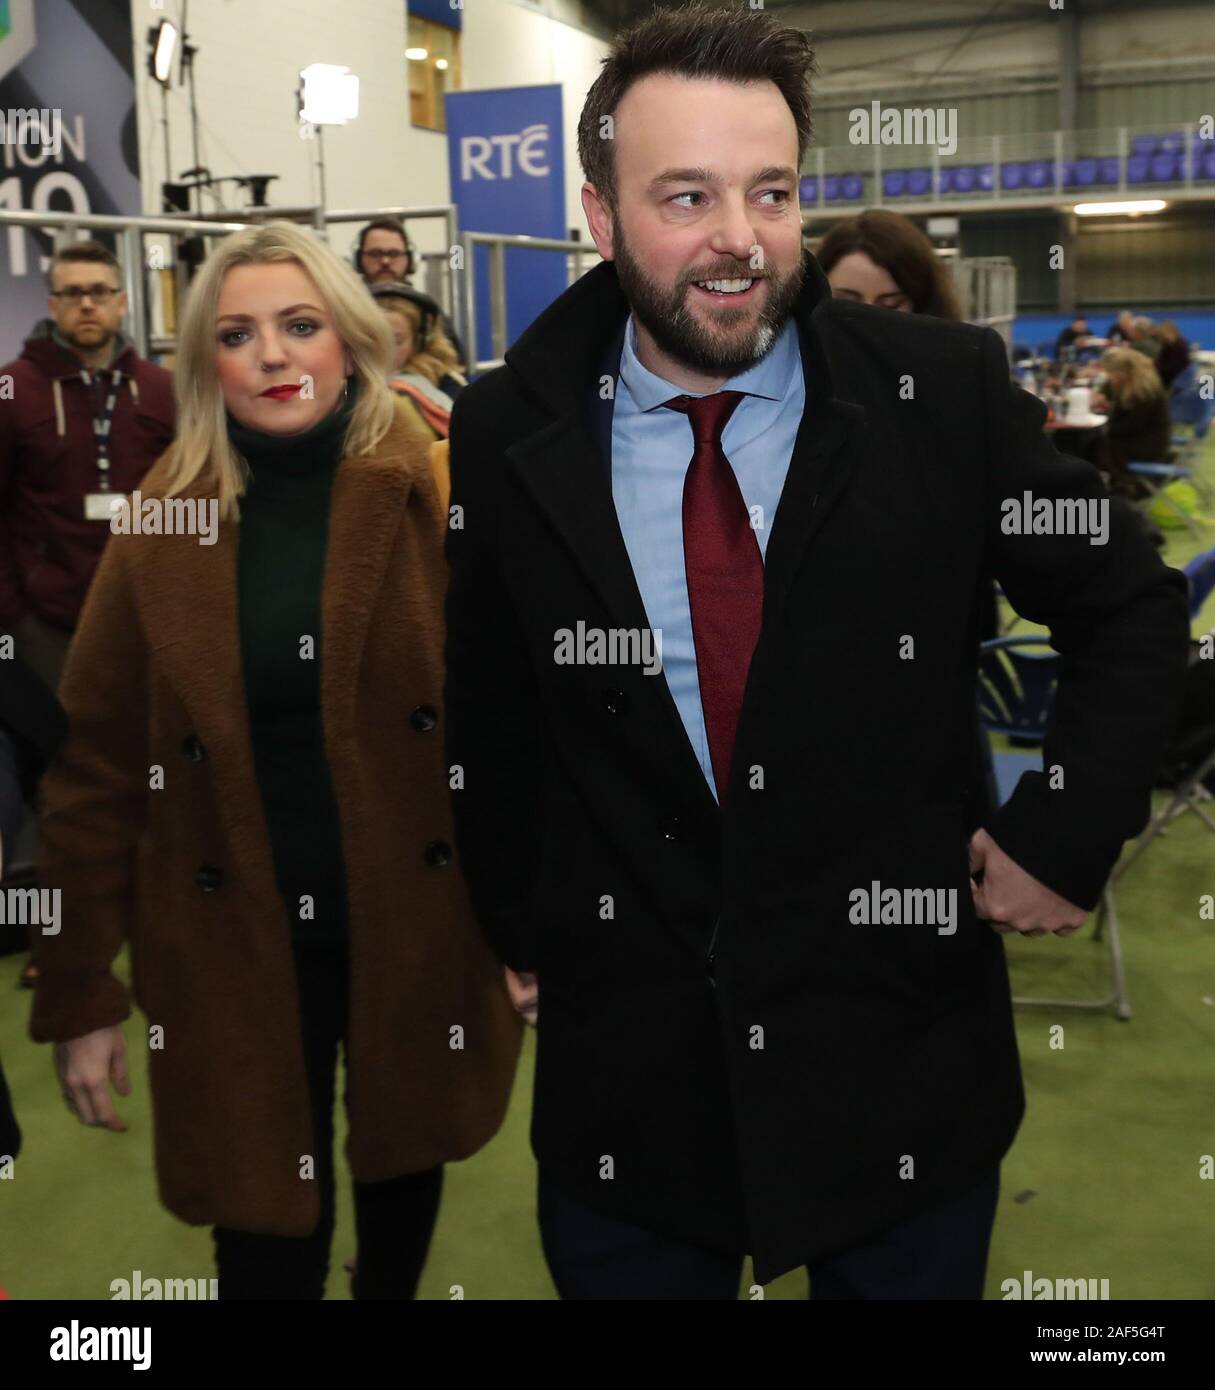 SDLP leader Colum Eastwood and his wife Rachel arrive at Meadowbank ...